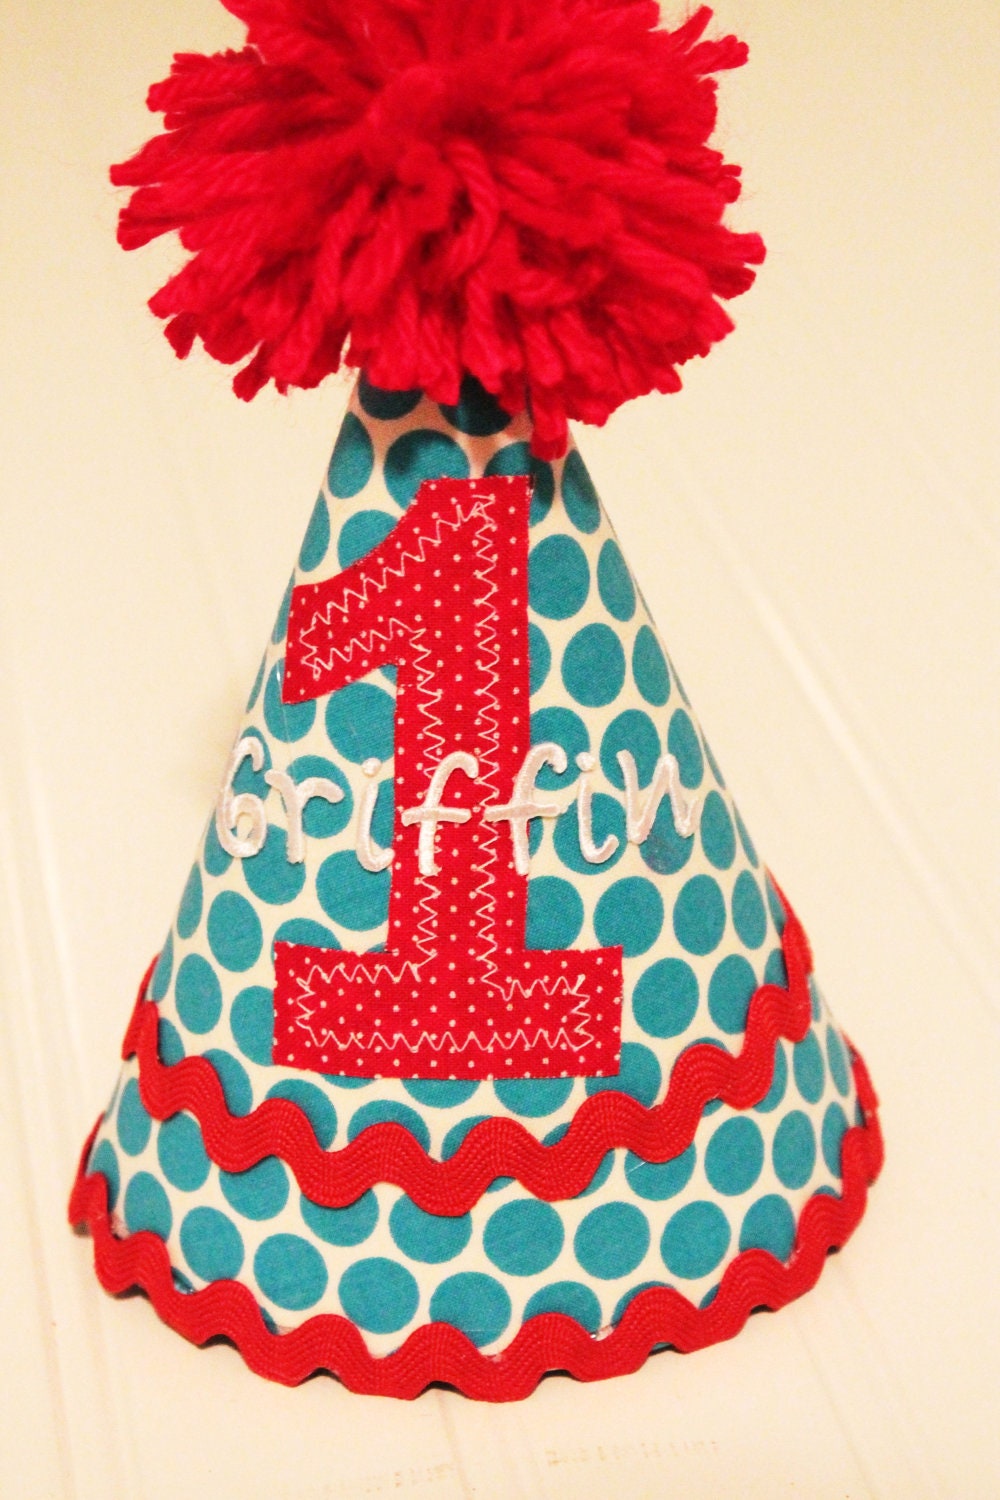 Personalized Aqua and Red Baby Boy Birthday Hat